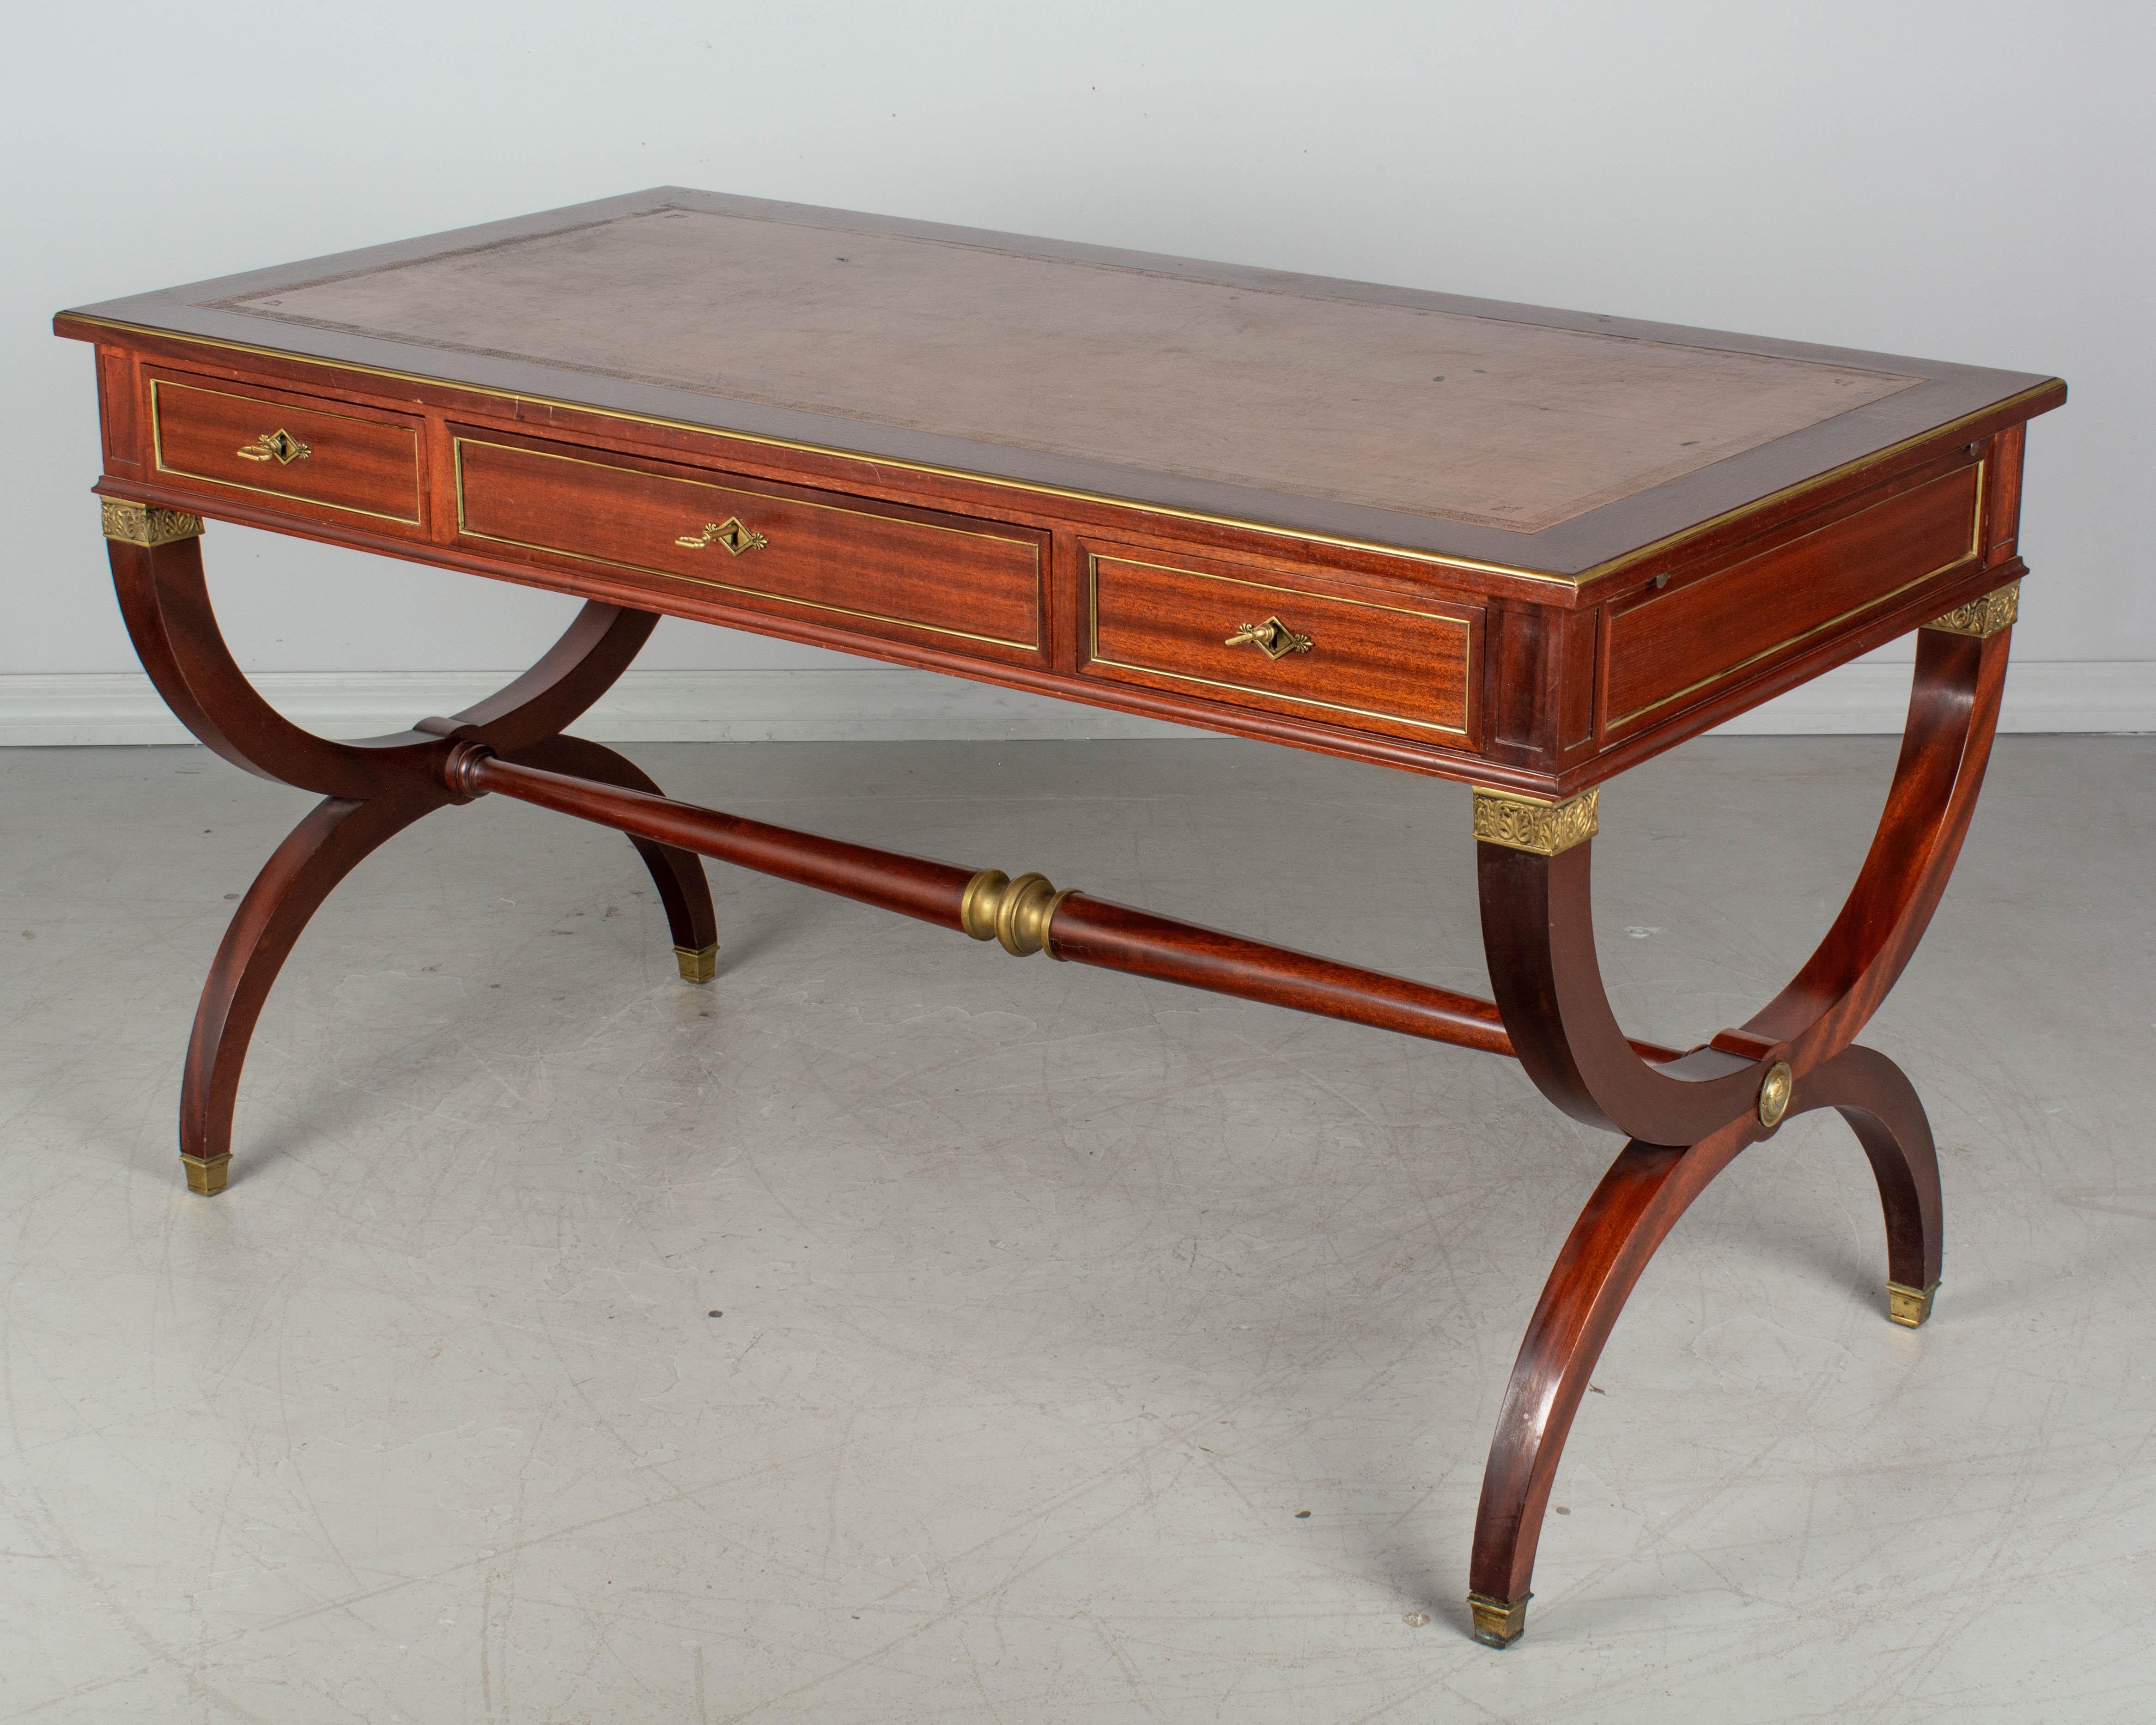 A French Empire style mahogany desk with leather top. Pullout / pull-out extensions on both sides provide additional work surface. Three dovetailed drawers with working locks and three keys. Brass hardware, trim and decorative medallions. Turned